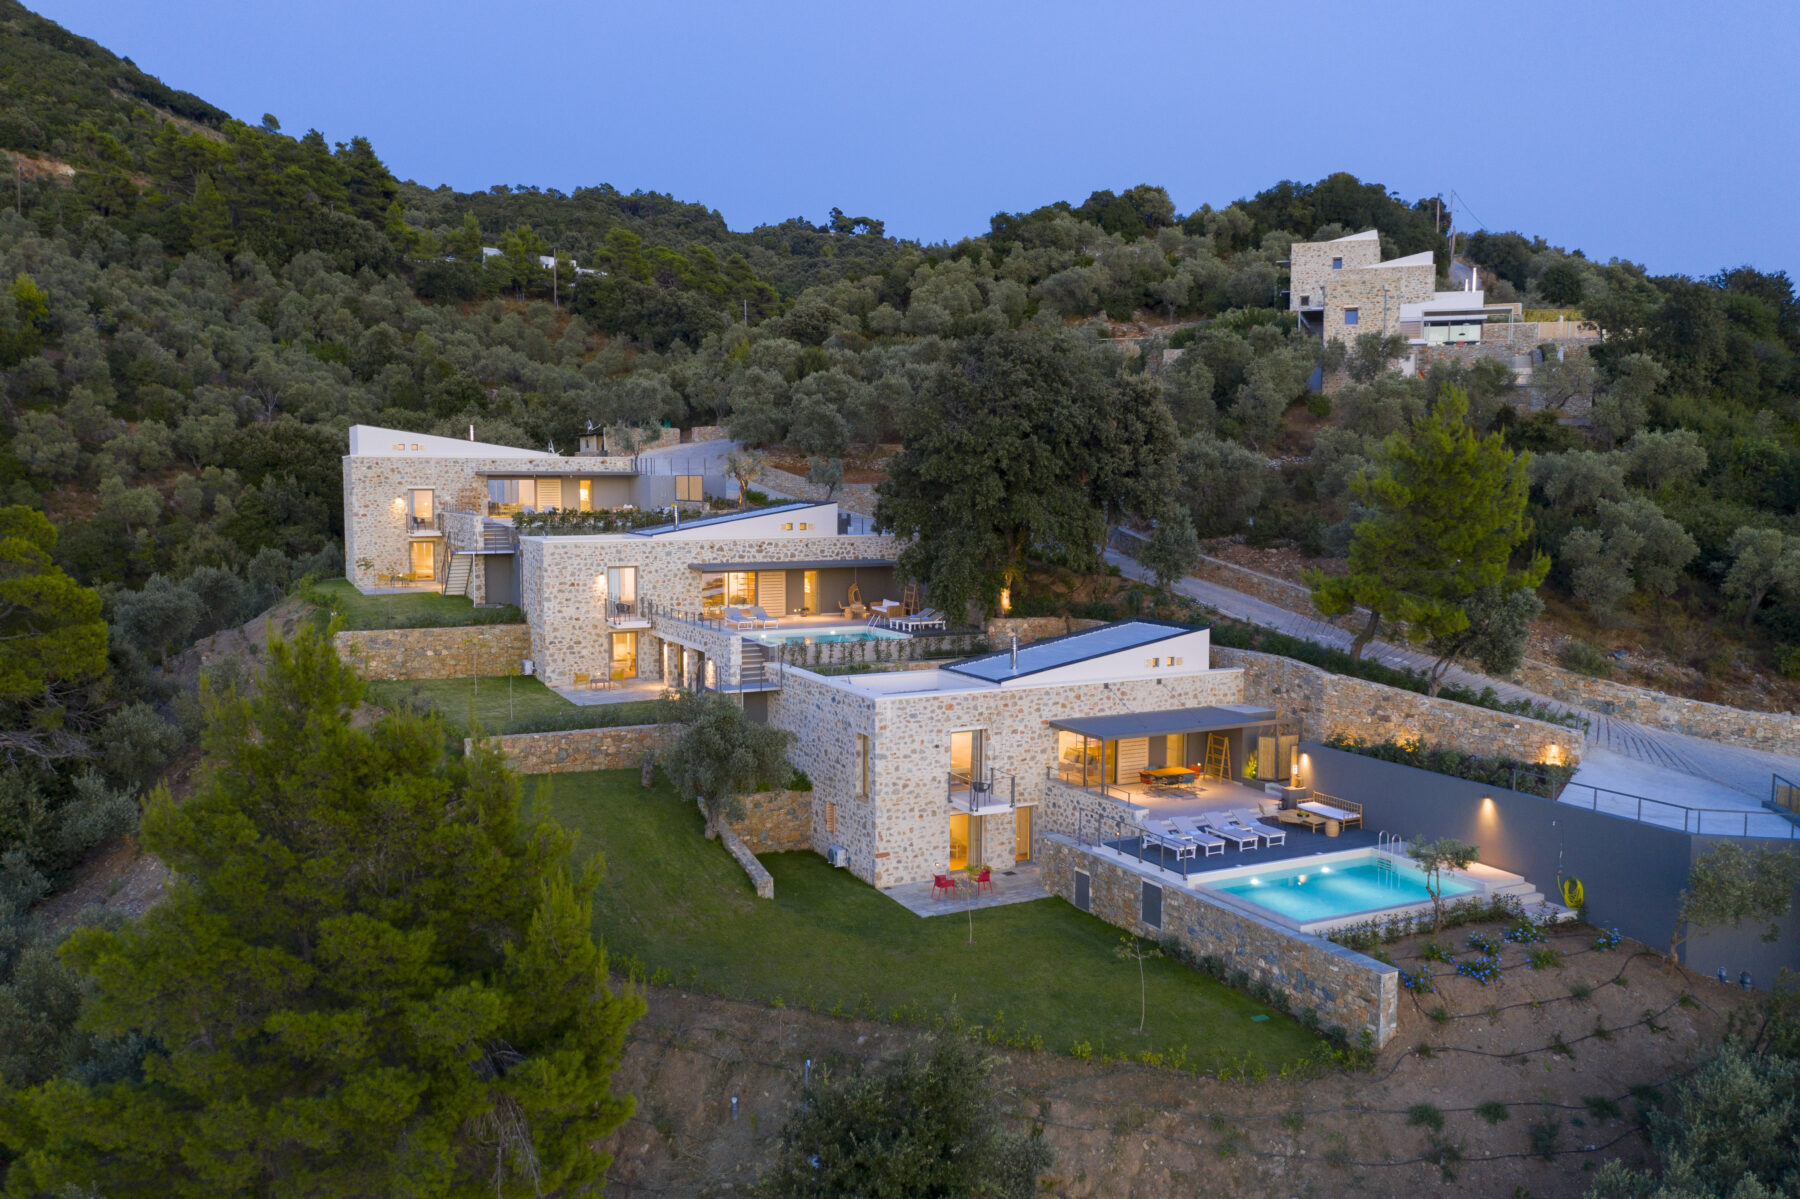 Archisearch Atrium Villas ΙΙ – 3 houses in Kehria Skiathos designed by 3harchitects.